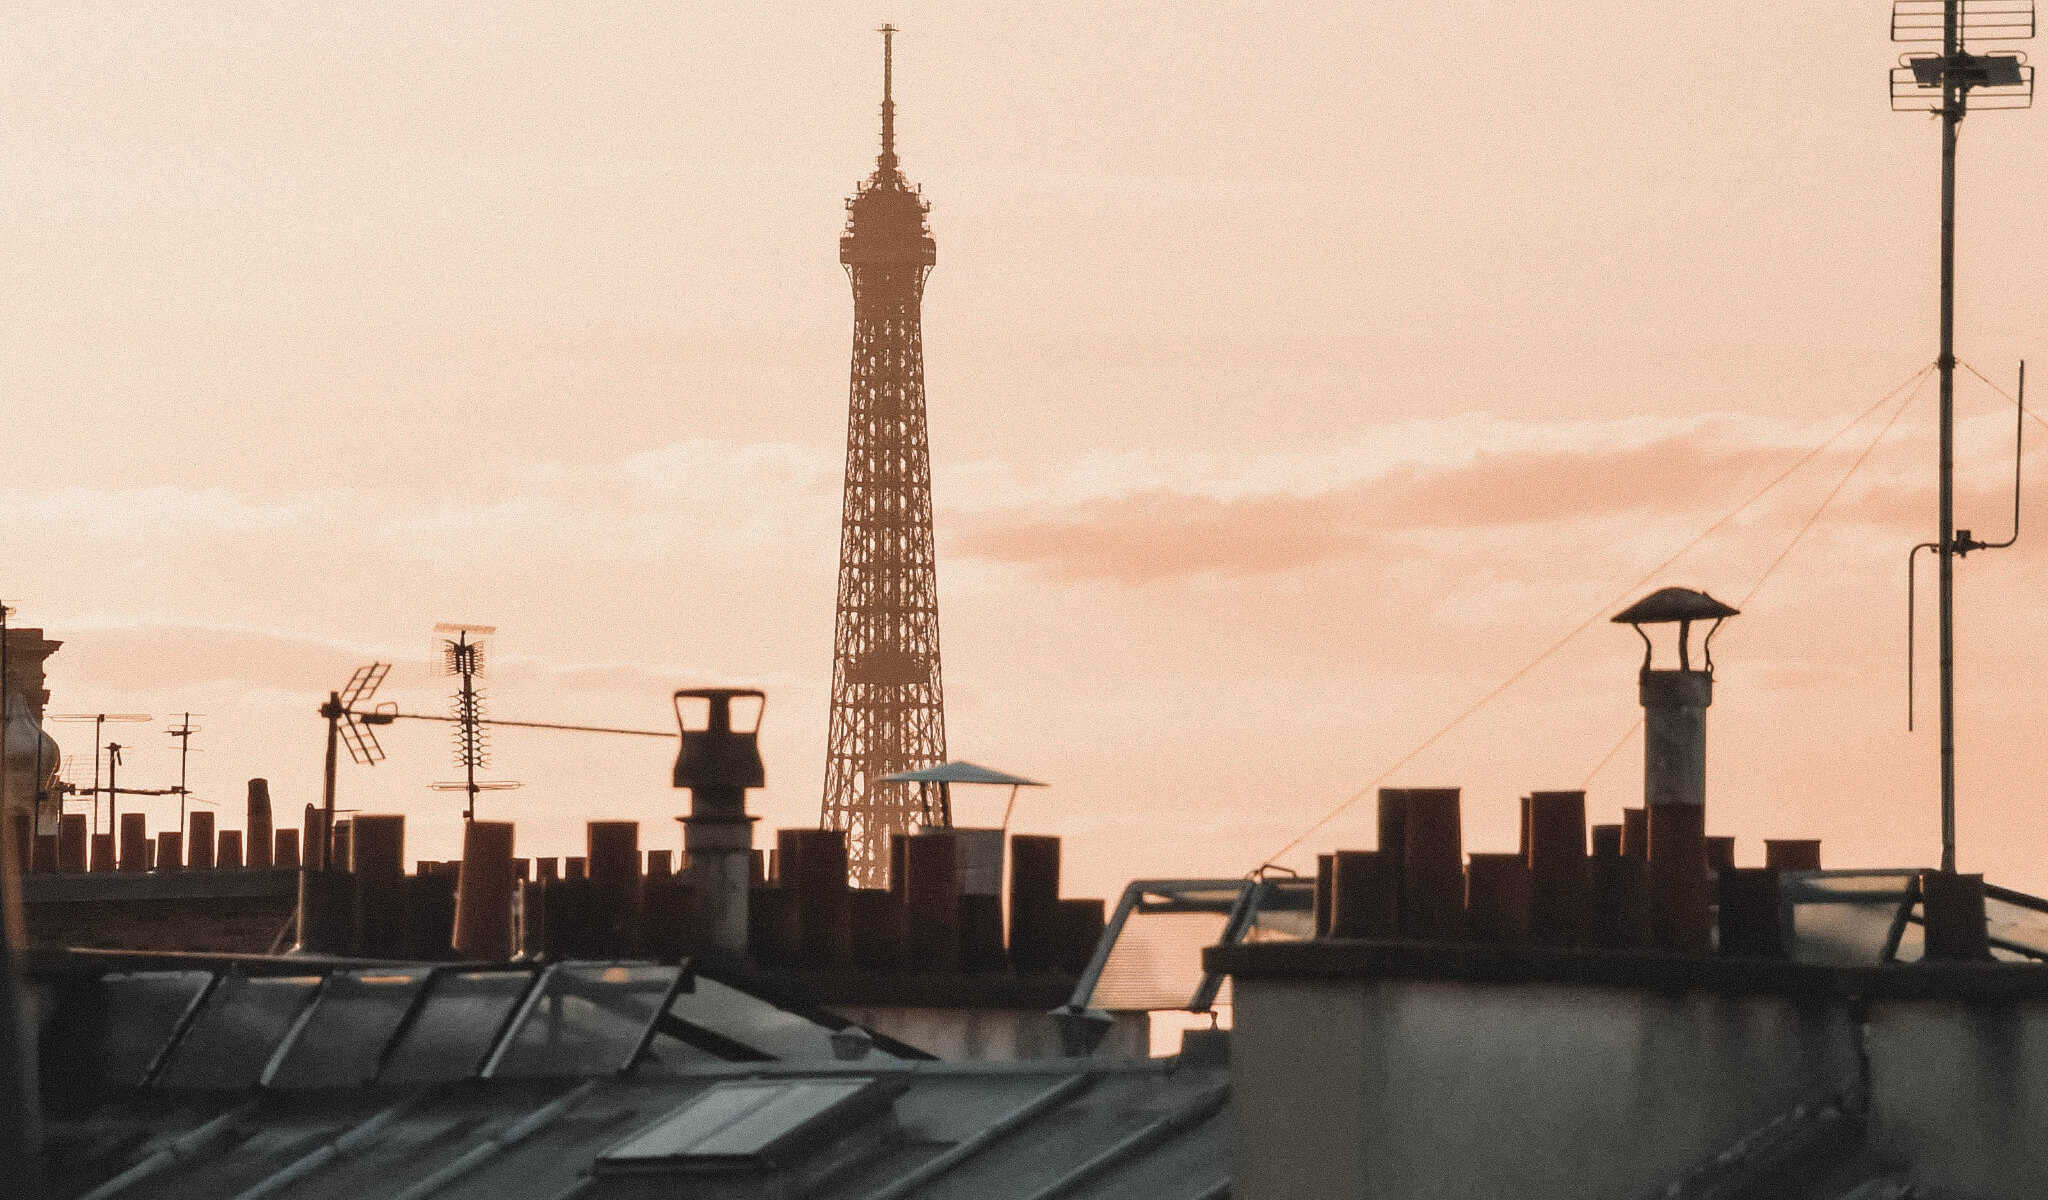 The Eiffel Tower's seen during sunset and with Parisian zinc roofs.